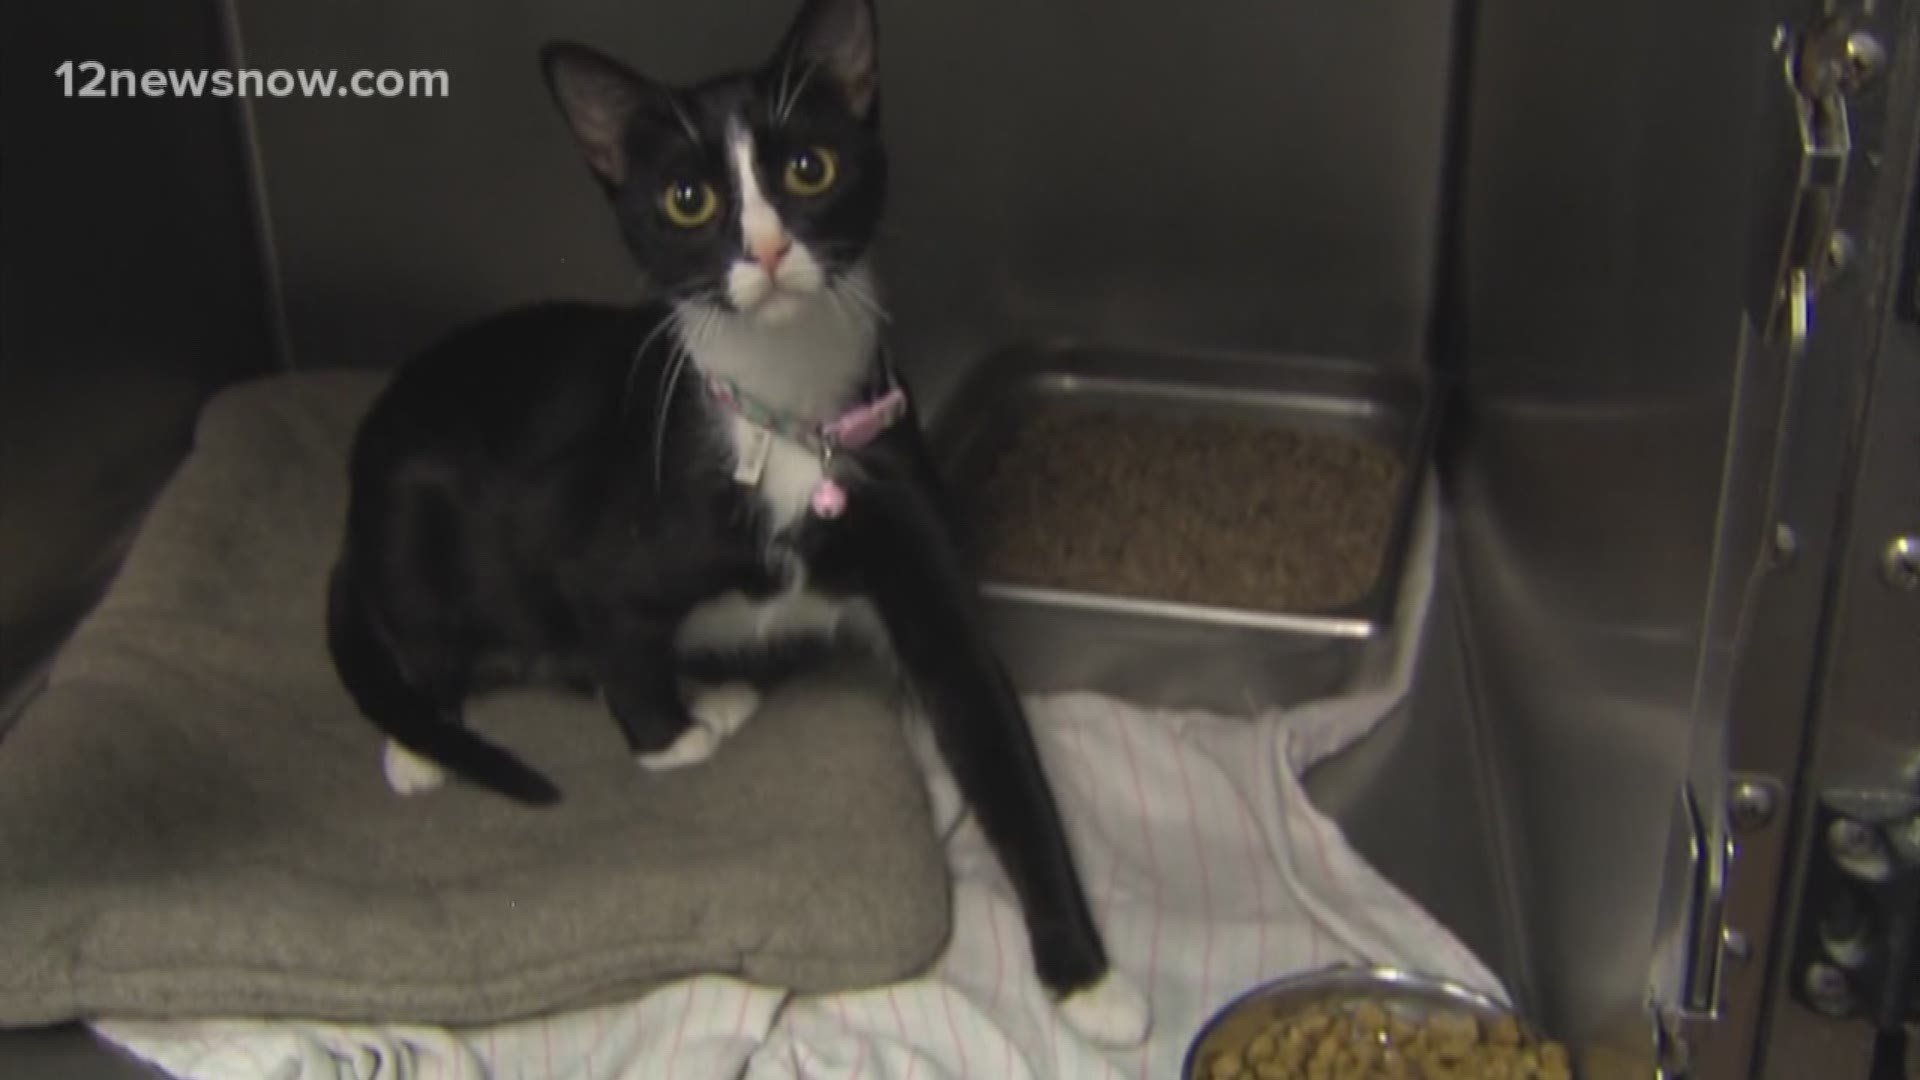 Our special pet of the day is Florence the cat! She's about a year old and was found cuddled up with her kittens. She is very sweet and would love a family to give her some tender love and care.